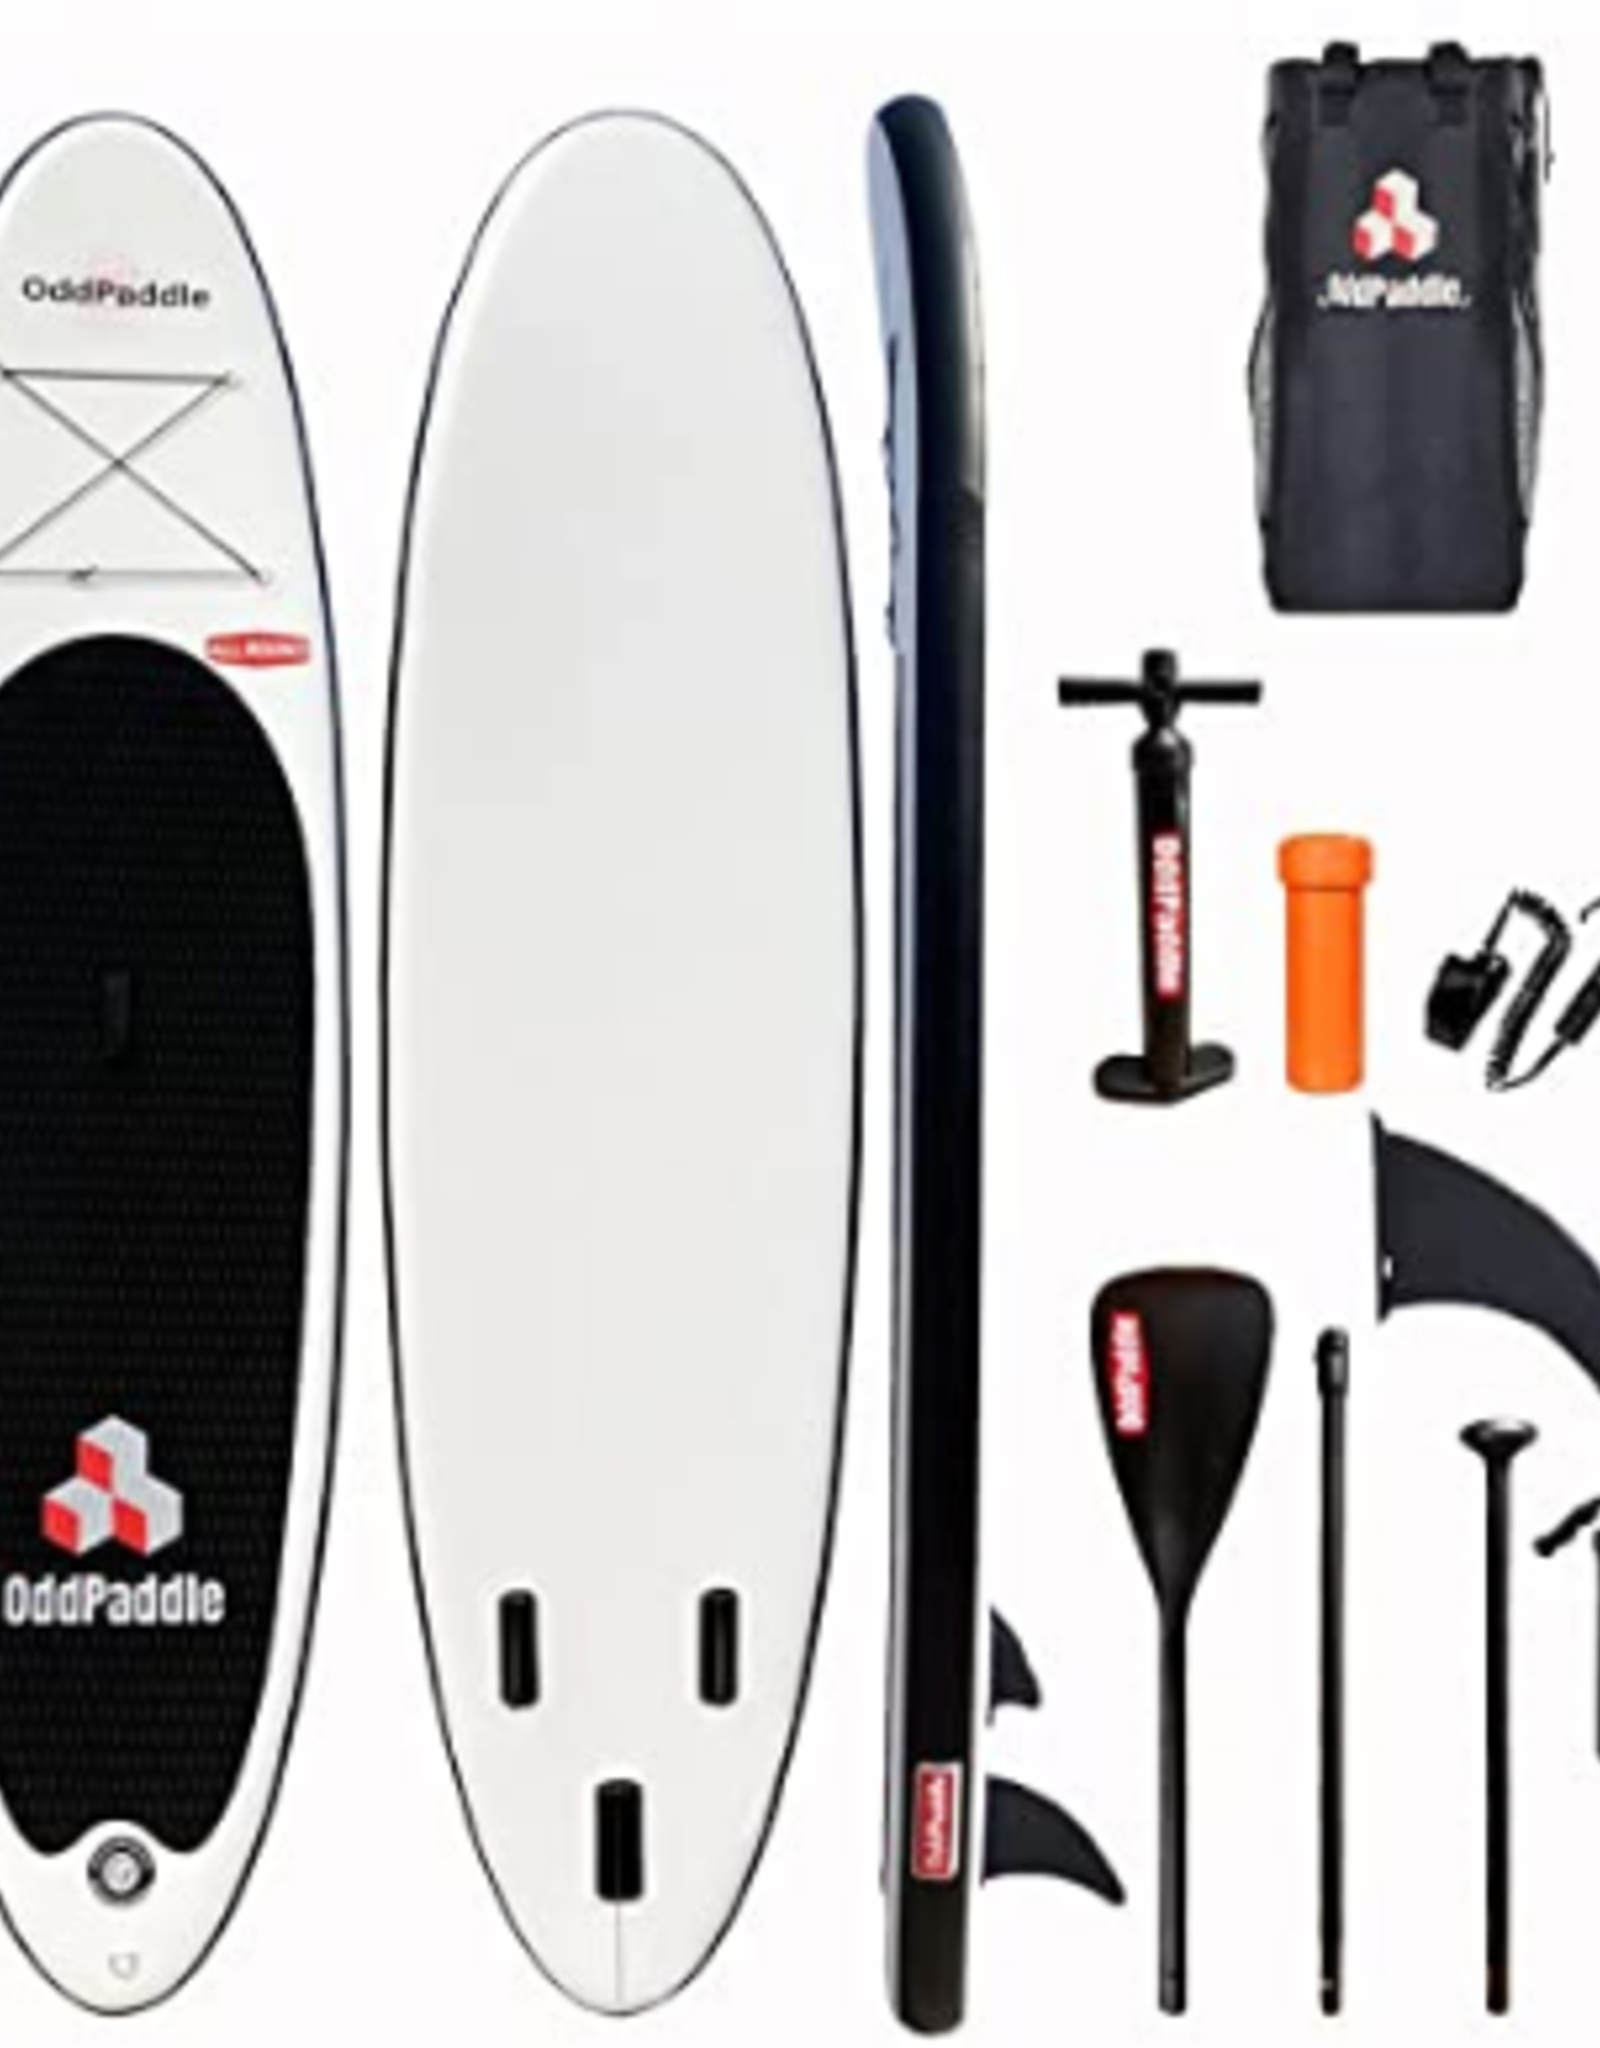 Odd paddle INFLATABLE STAND UP ODD PADDLE 11' NOIR BLANC